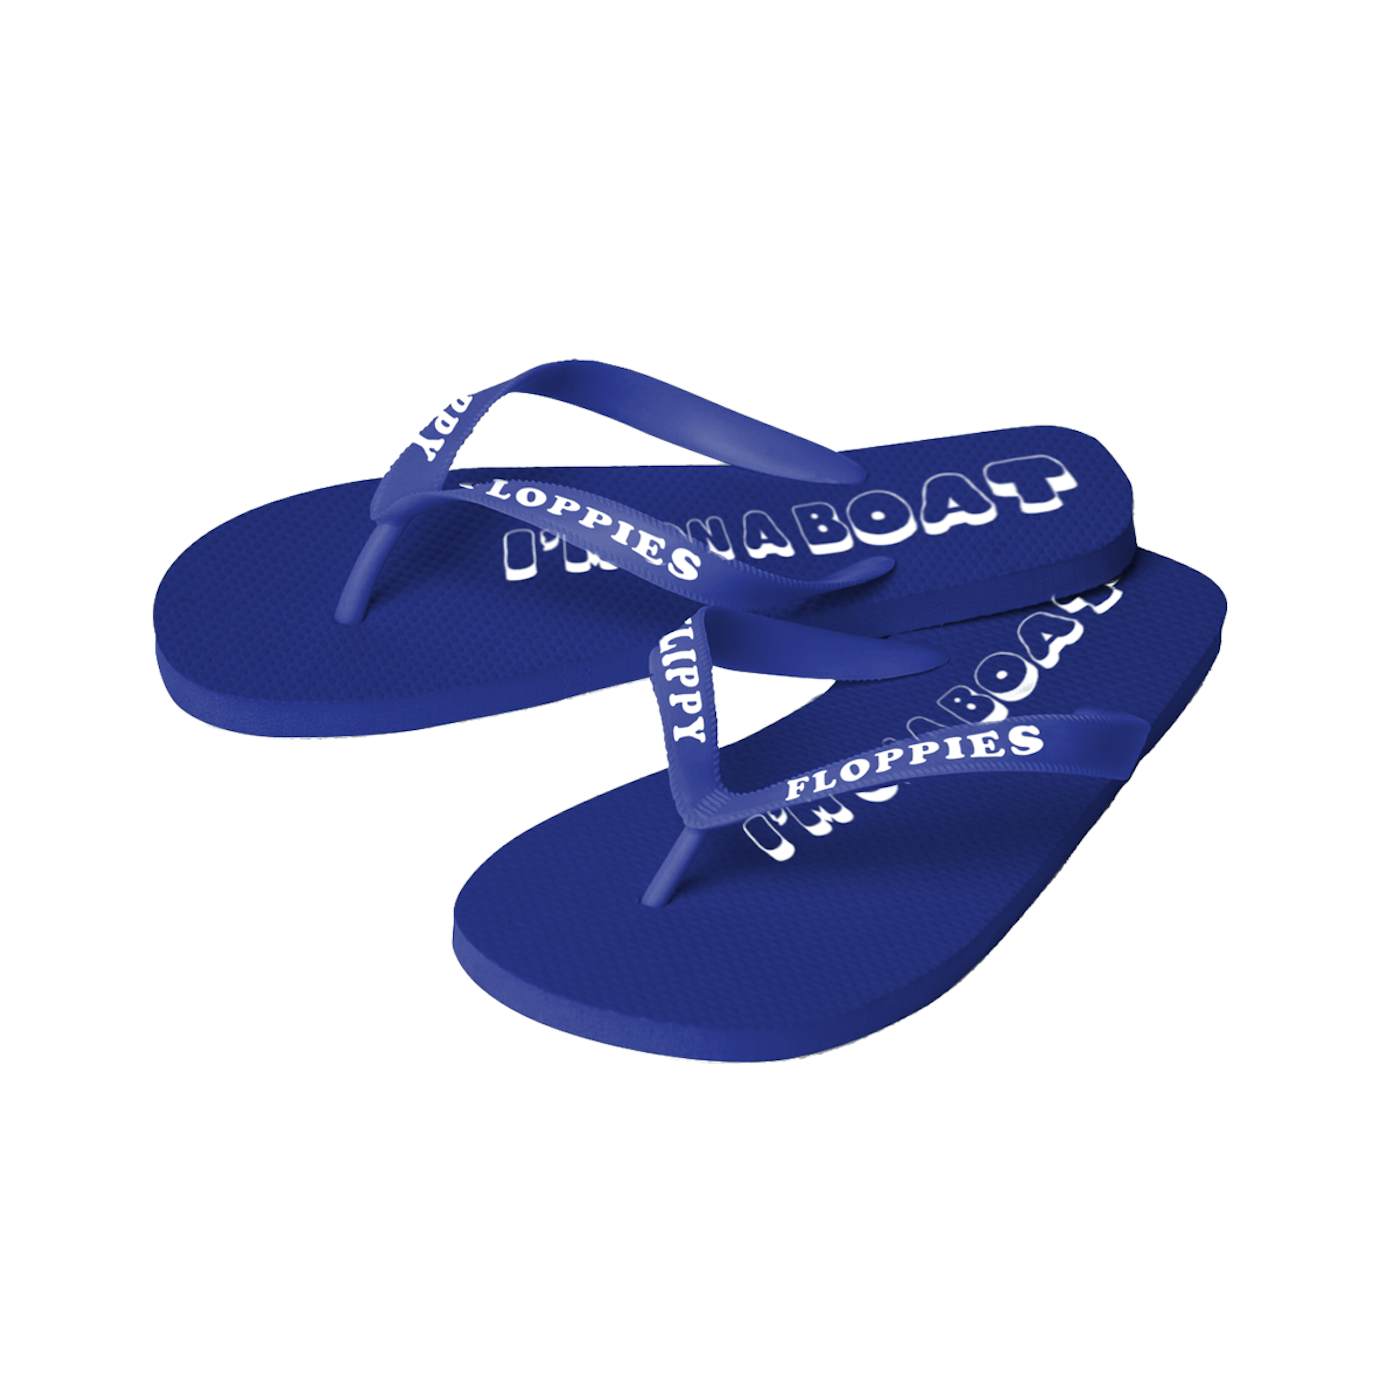 The Lonely Island Flippy Floppies